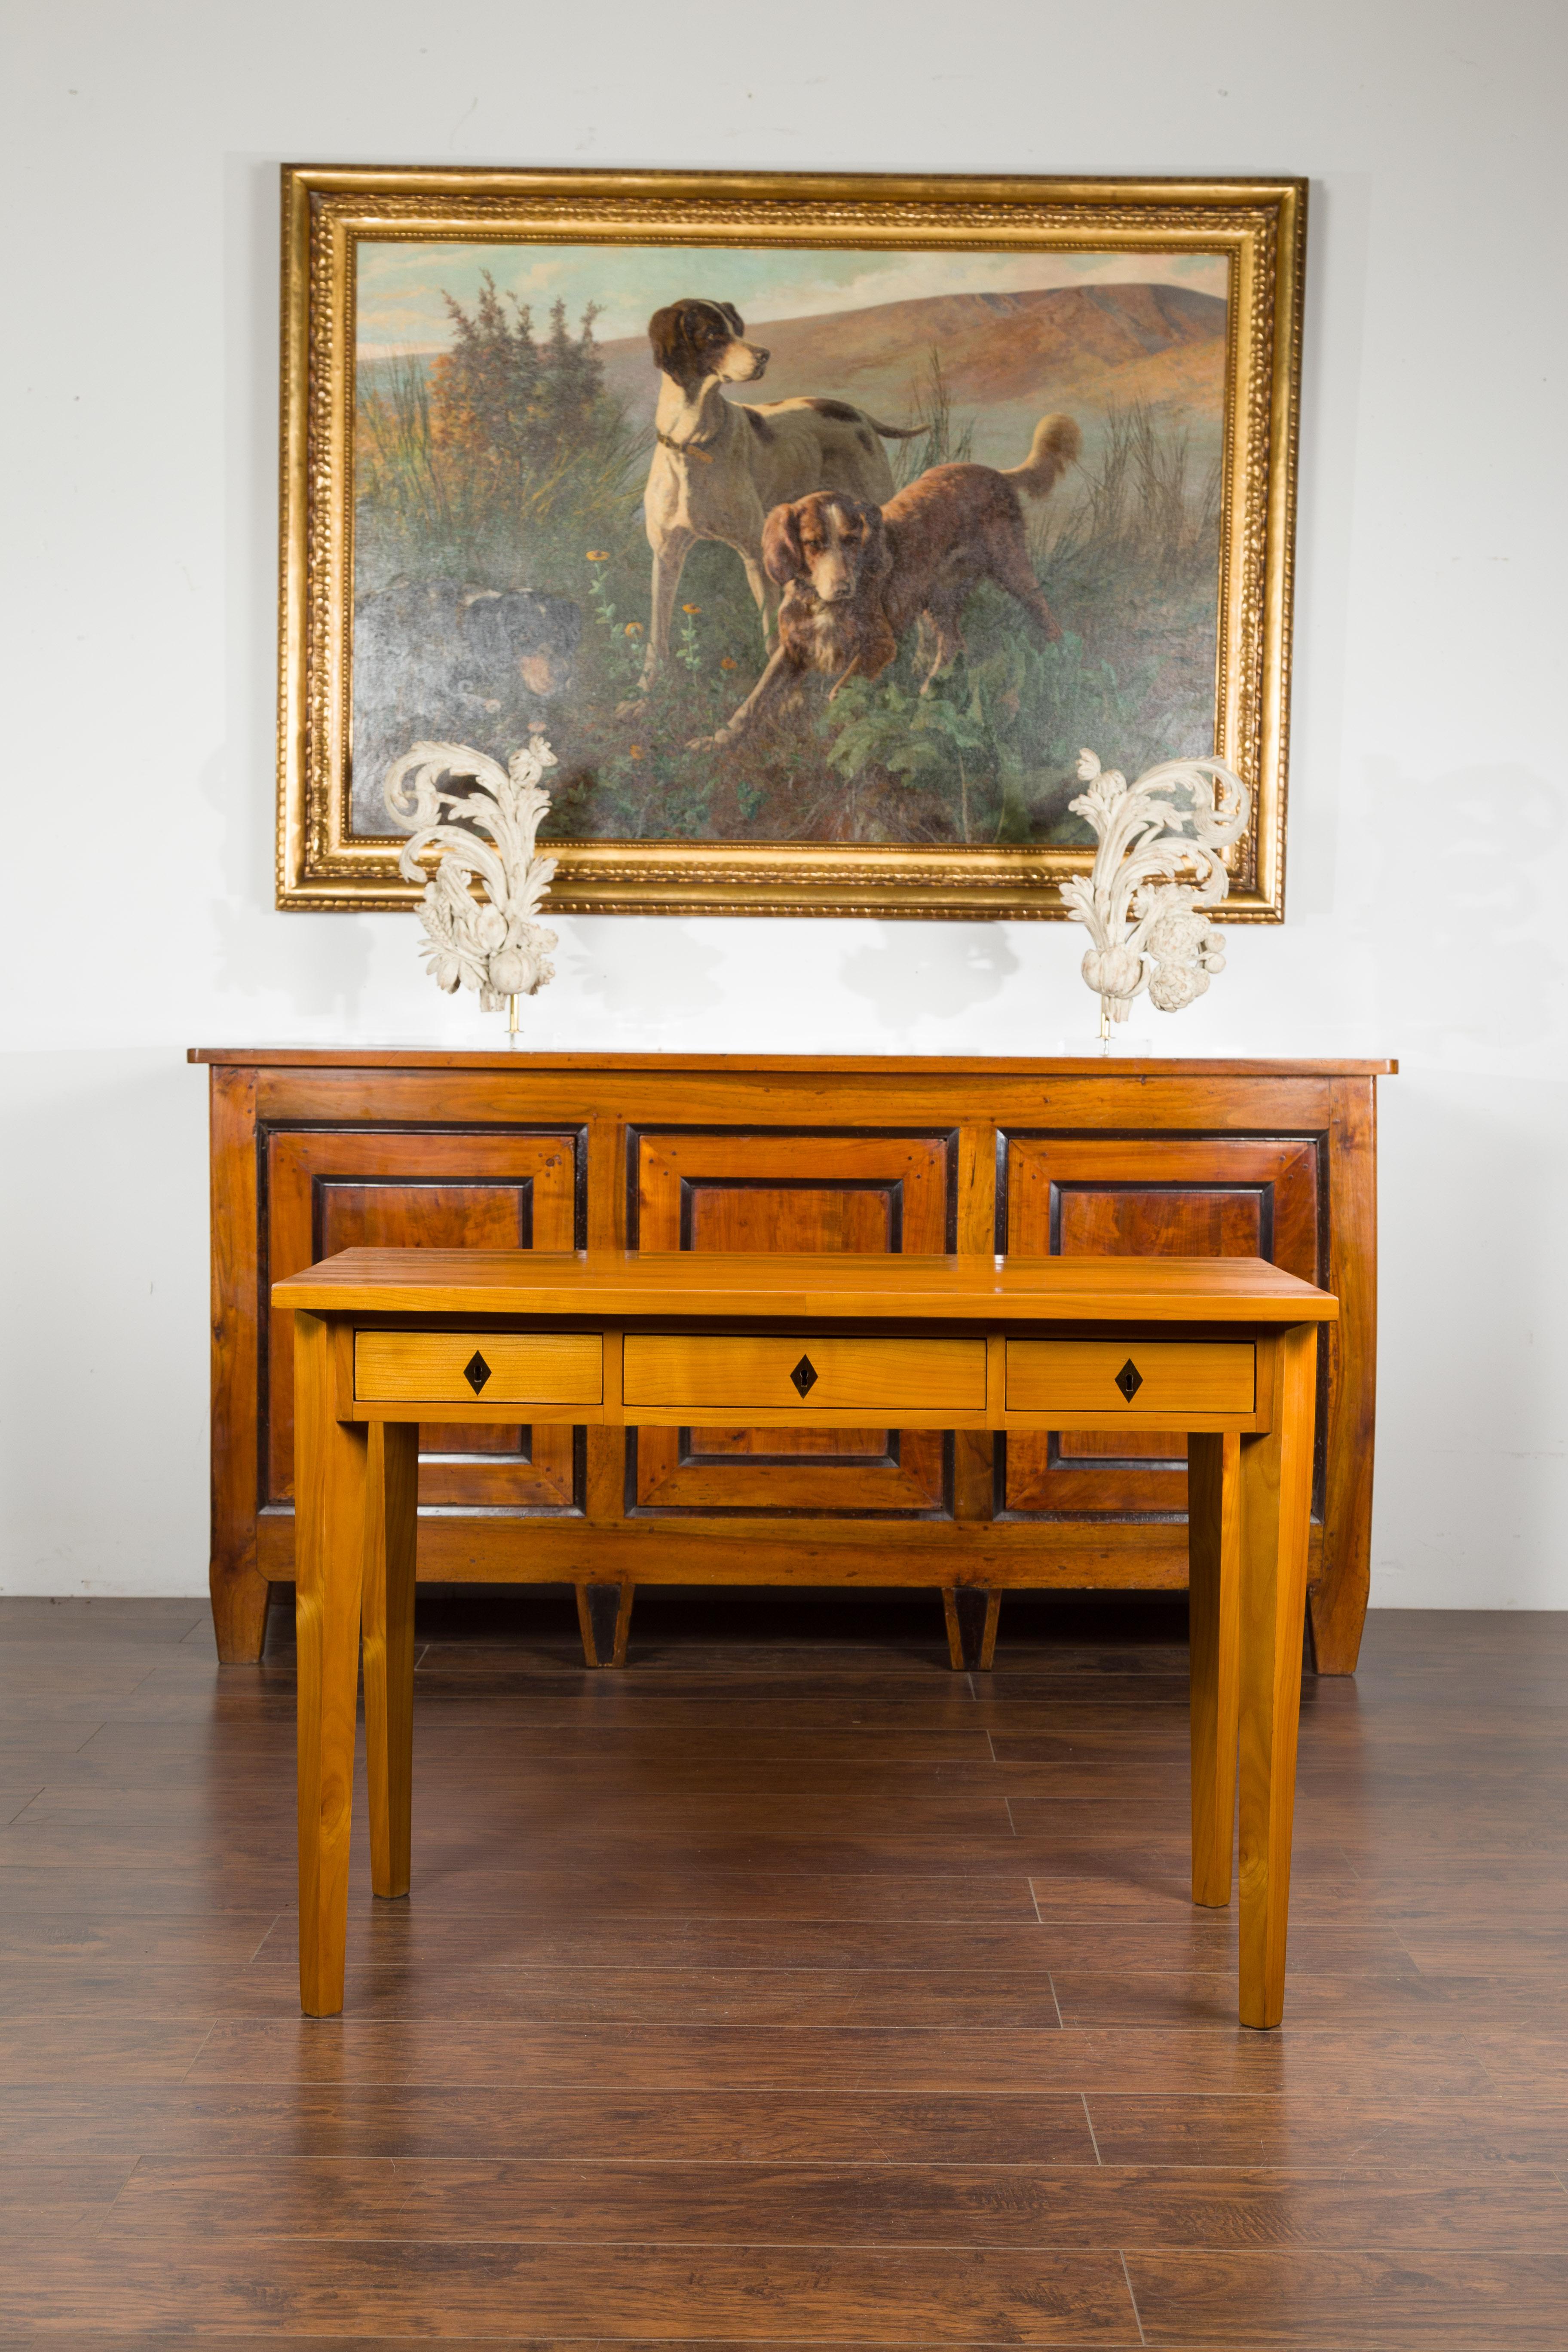 A Biedermeier period walnut desk from the mid-19th century, with three drawers and blond patina. Created in Austria during the second quarter of the 19th century, this Biedermeier walnut table features a rectangular top sitting above three